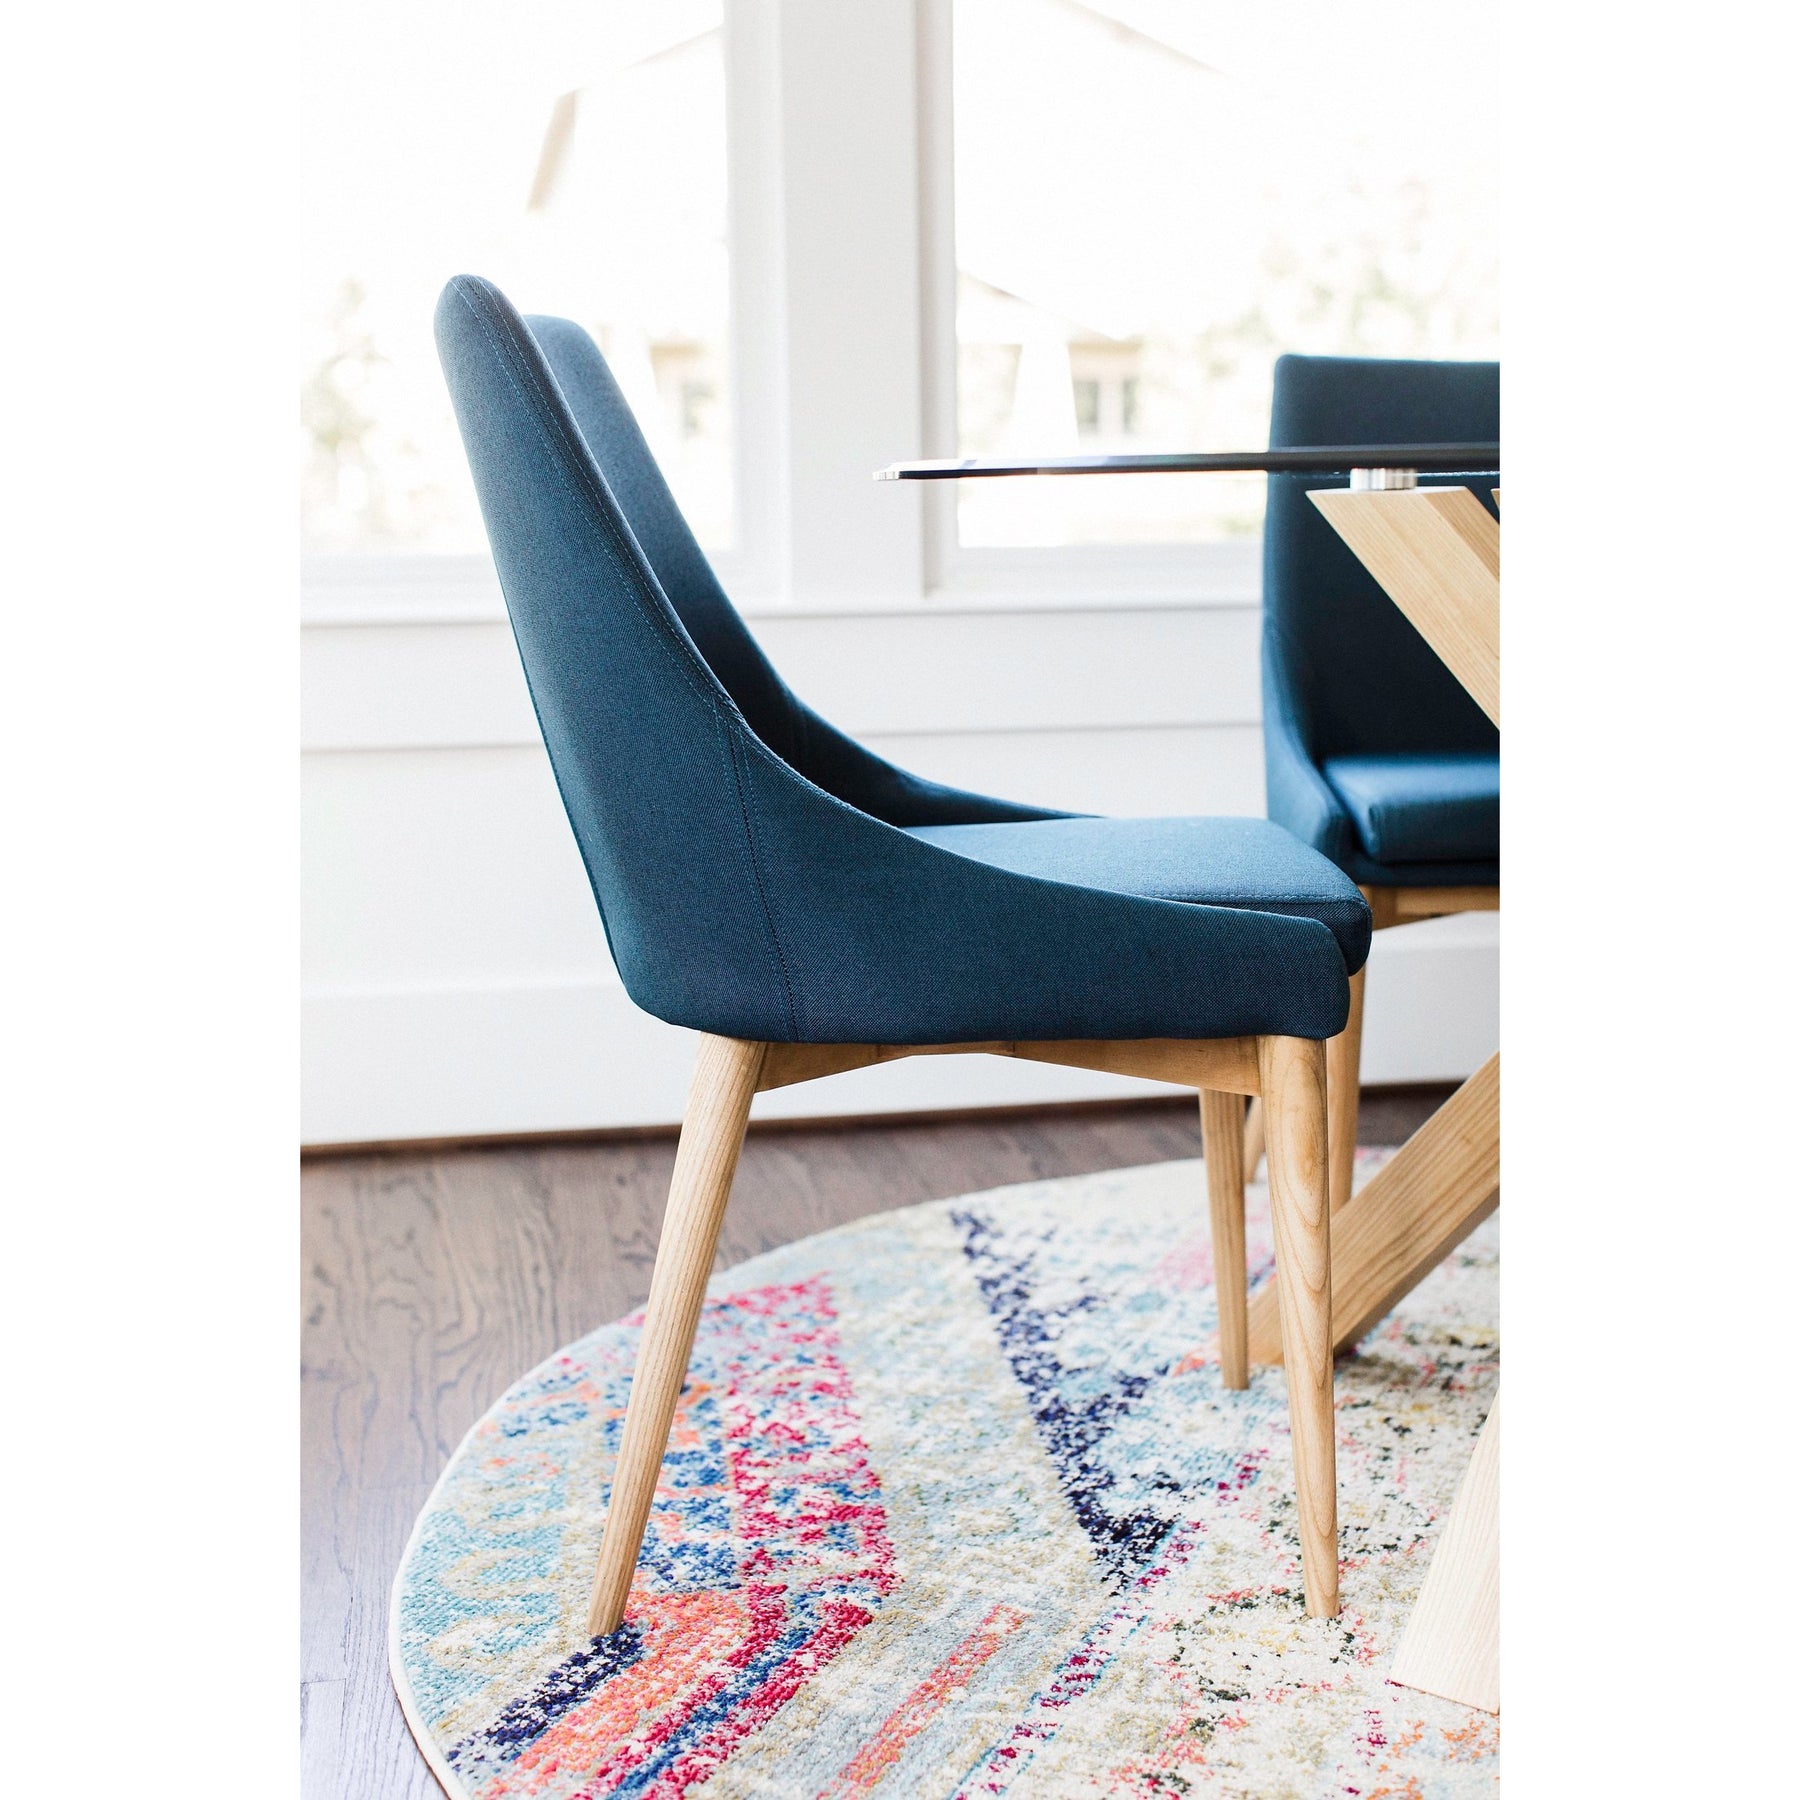 Edloe Finch Jessica Contemporary Dining Chair in Blue, Set of 2